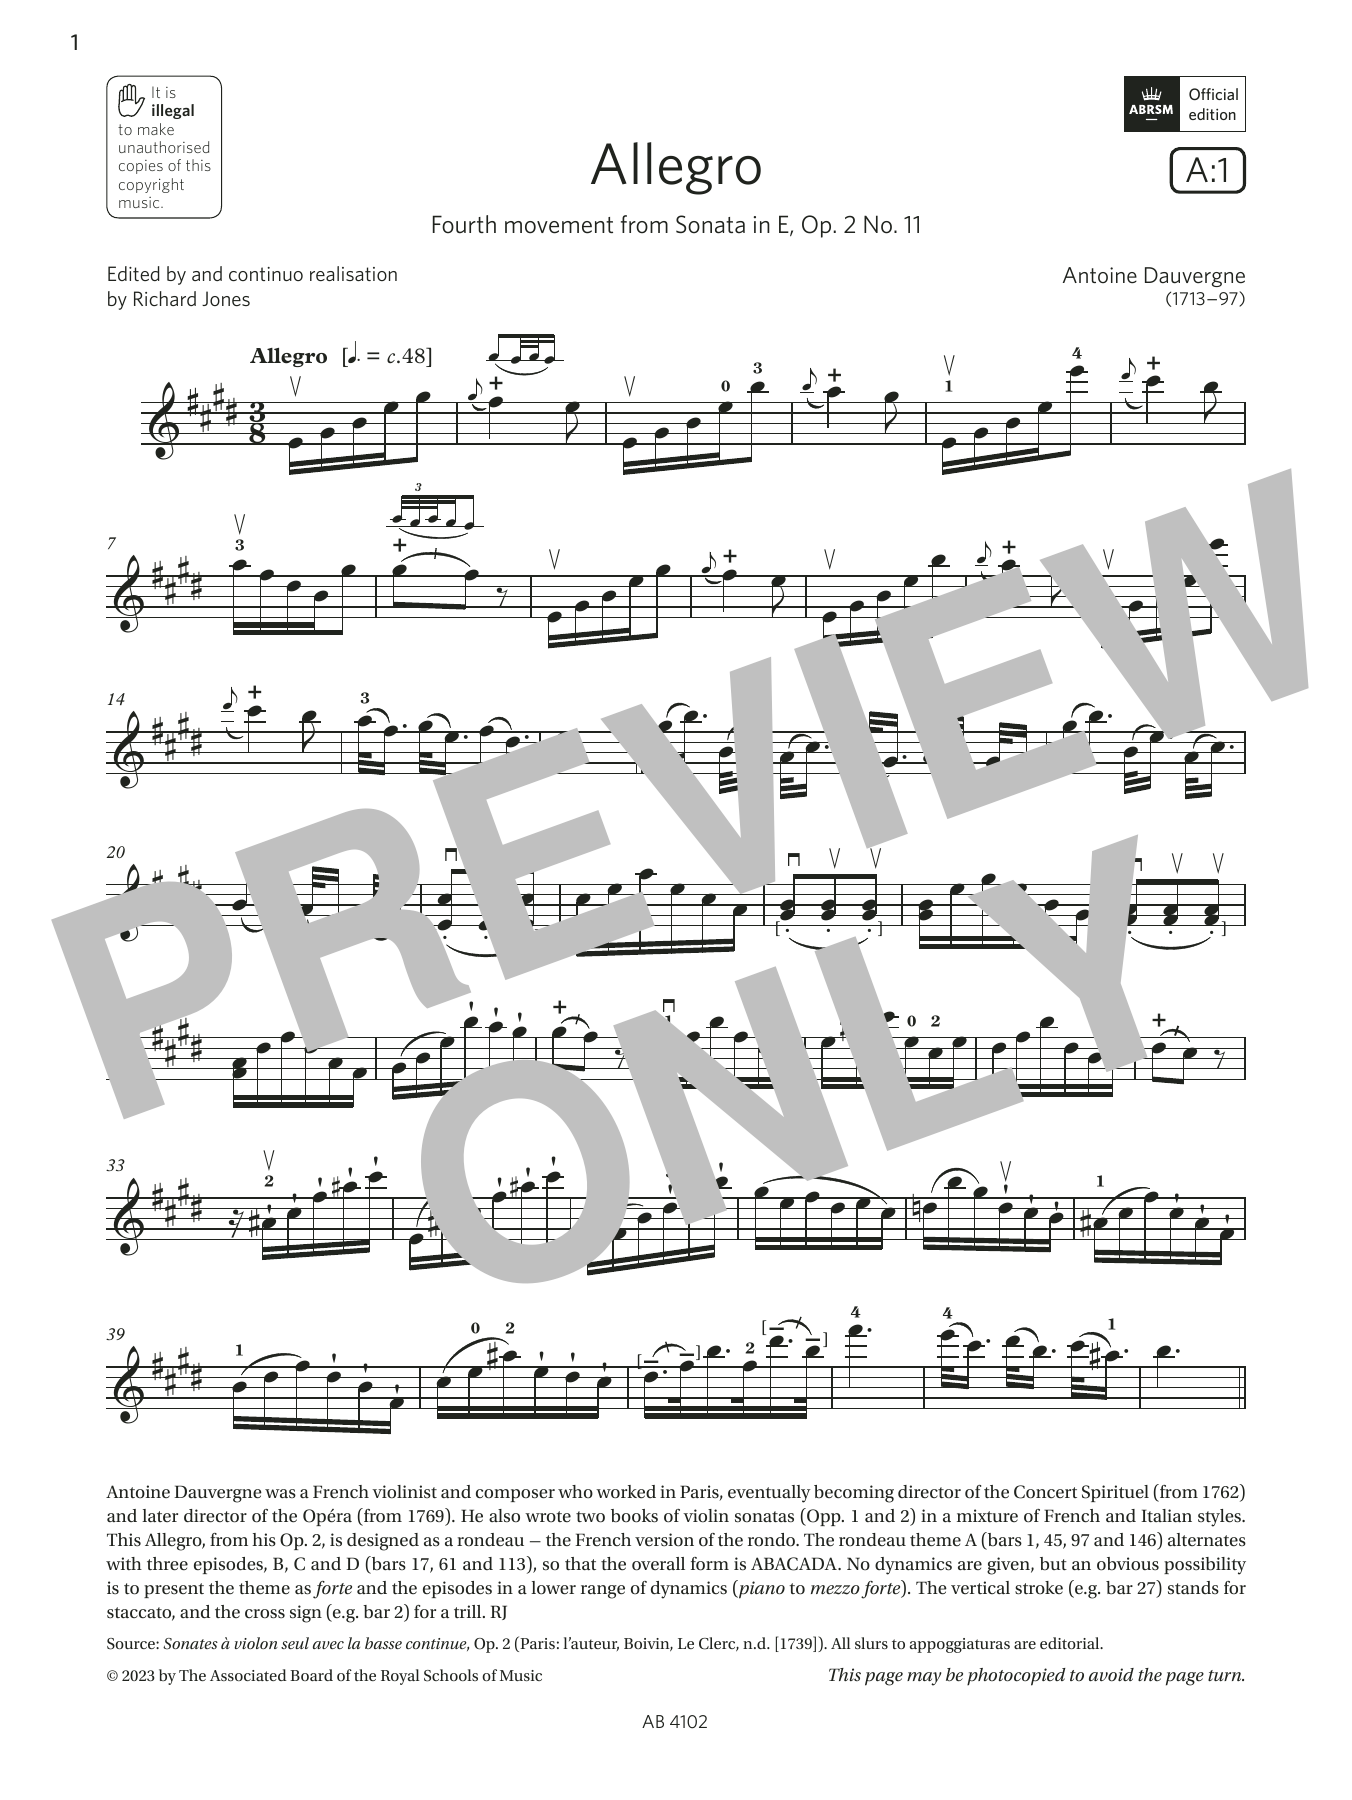 Download Antoine Dauvergne Allegro (Grade 8, A1, from the ABRSM Vi Sheet Music